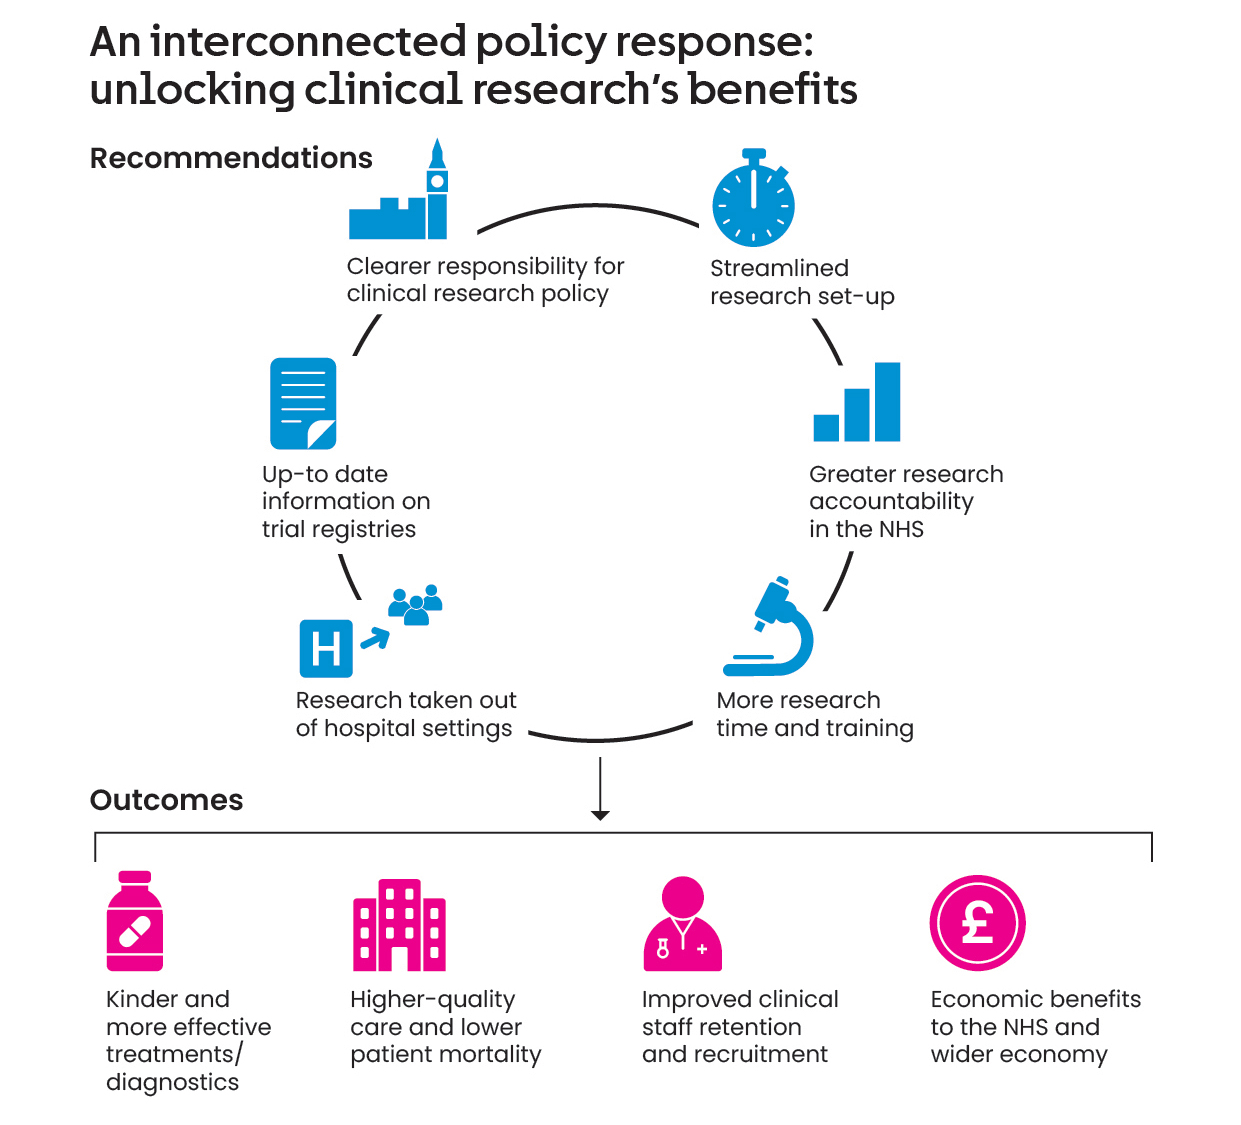 An infographic detailing how an interconnected policy response can unlock the benefits of clinical research.